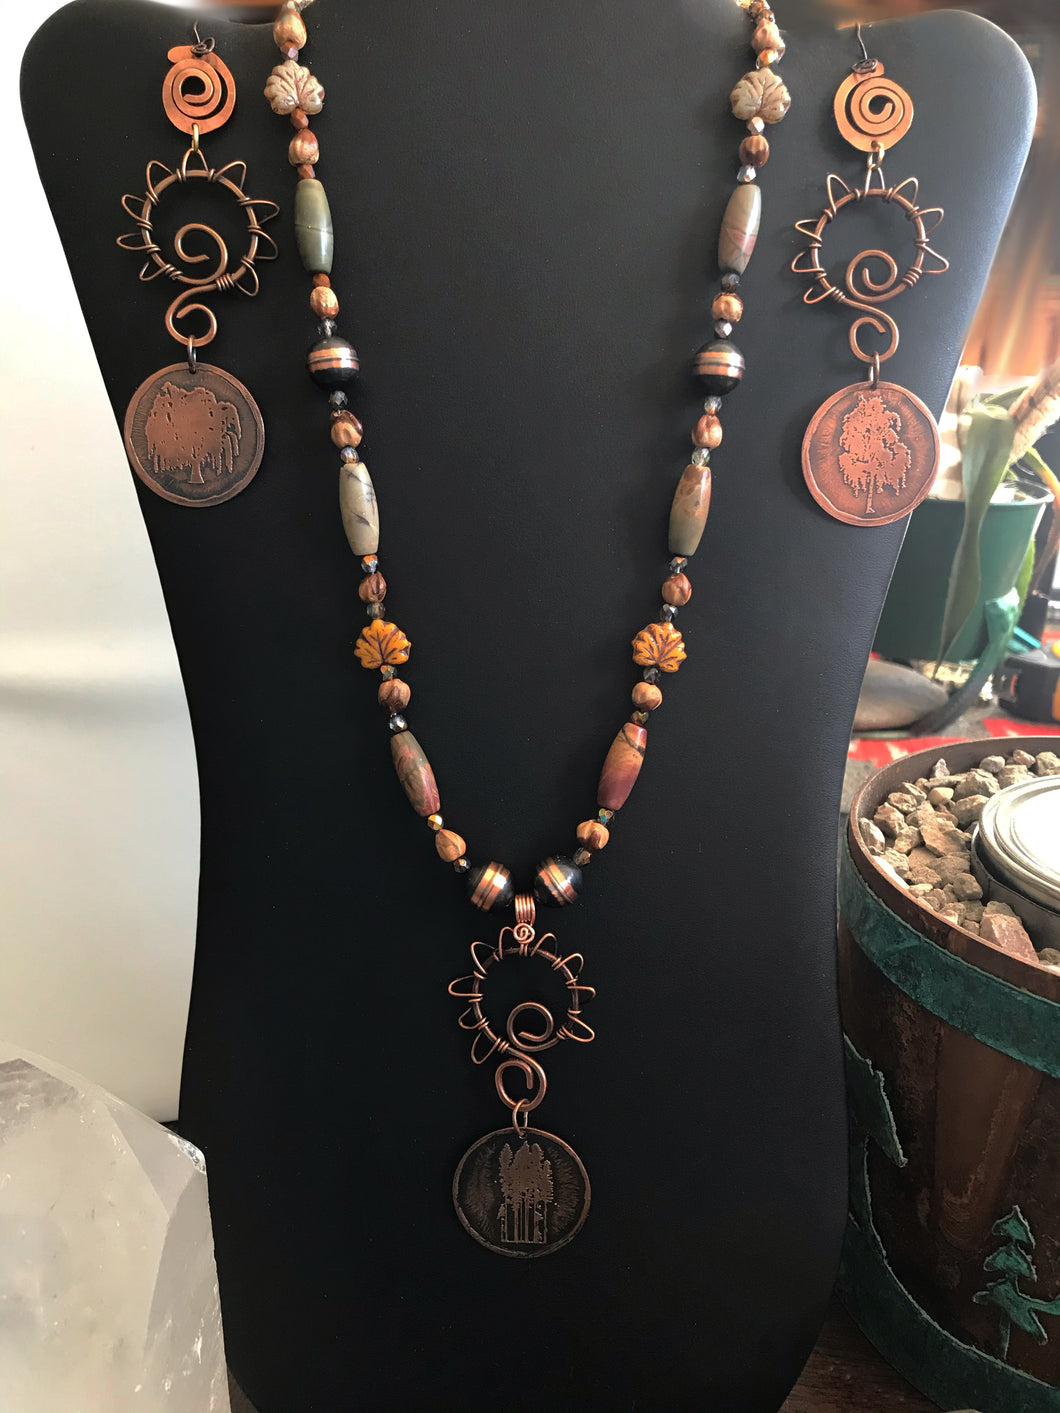 The Majesty of Trees Necklace and Earrings Set